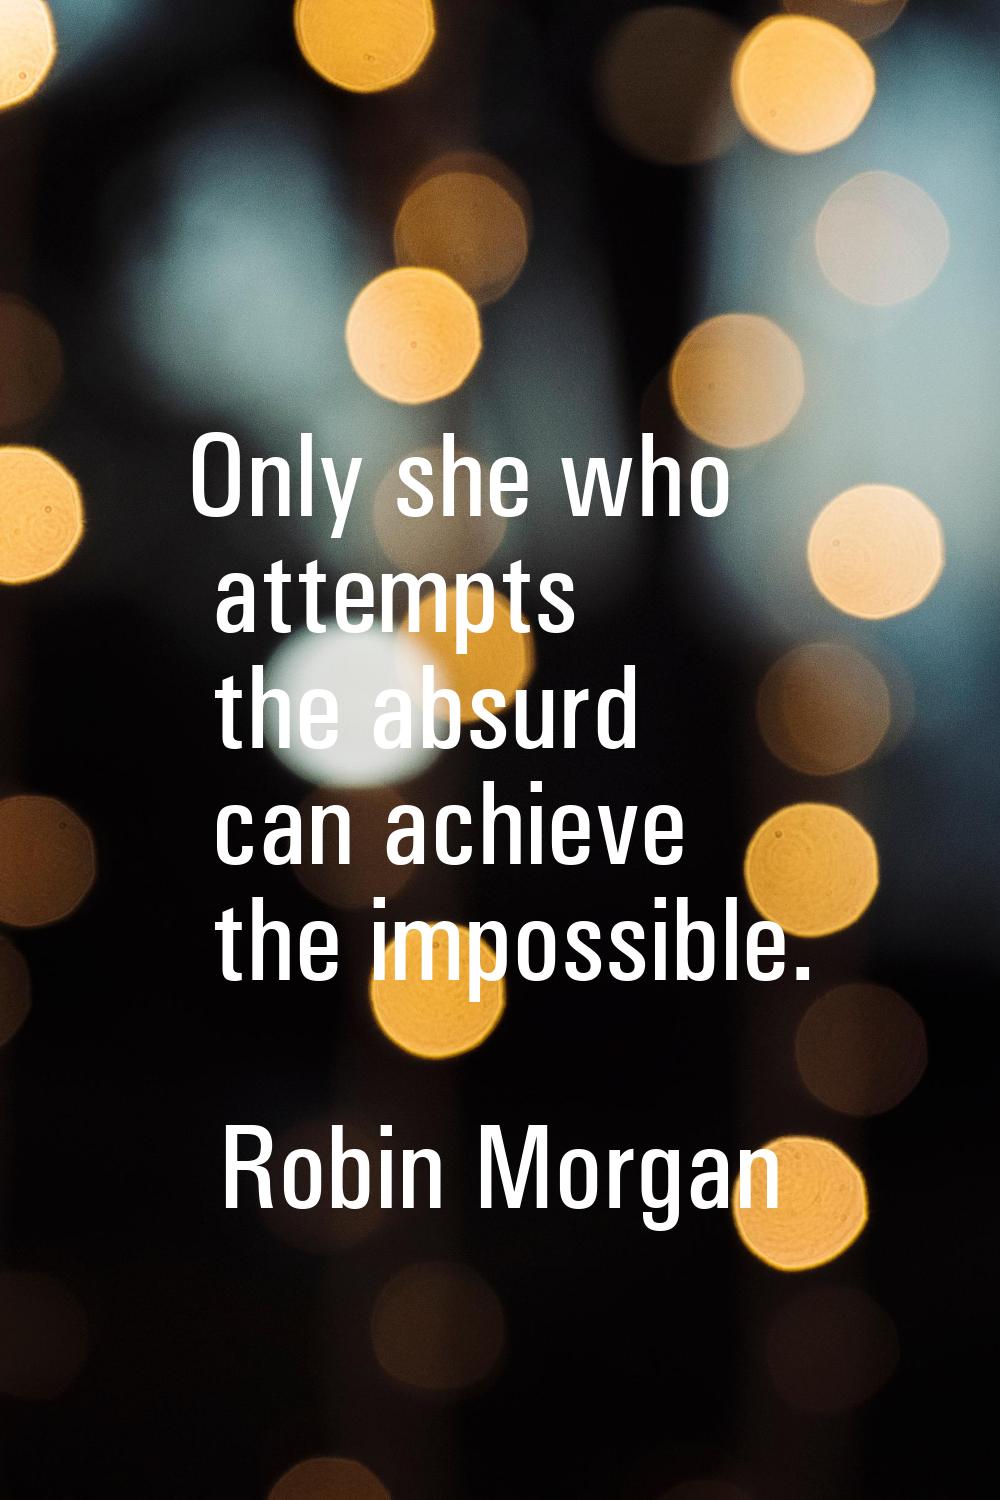 Only she who attempts the absurd can achieve the impossible.